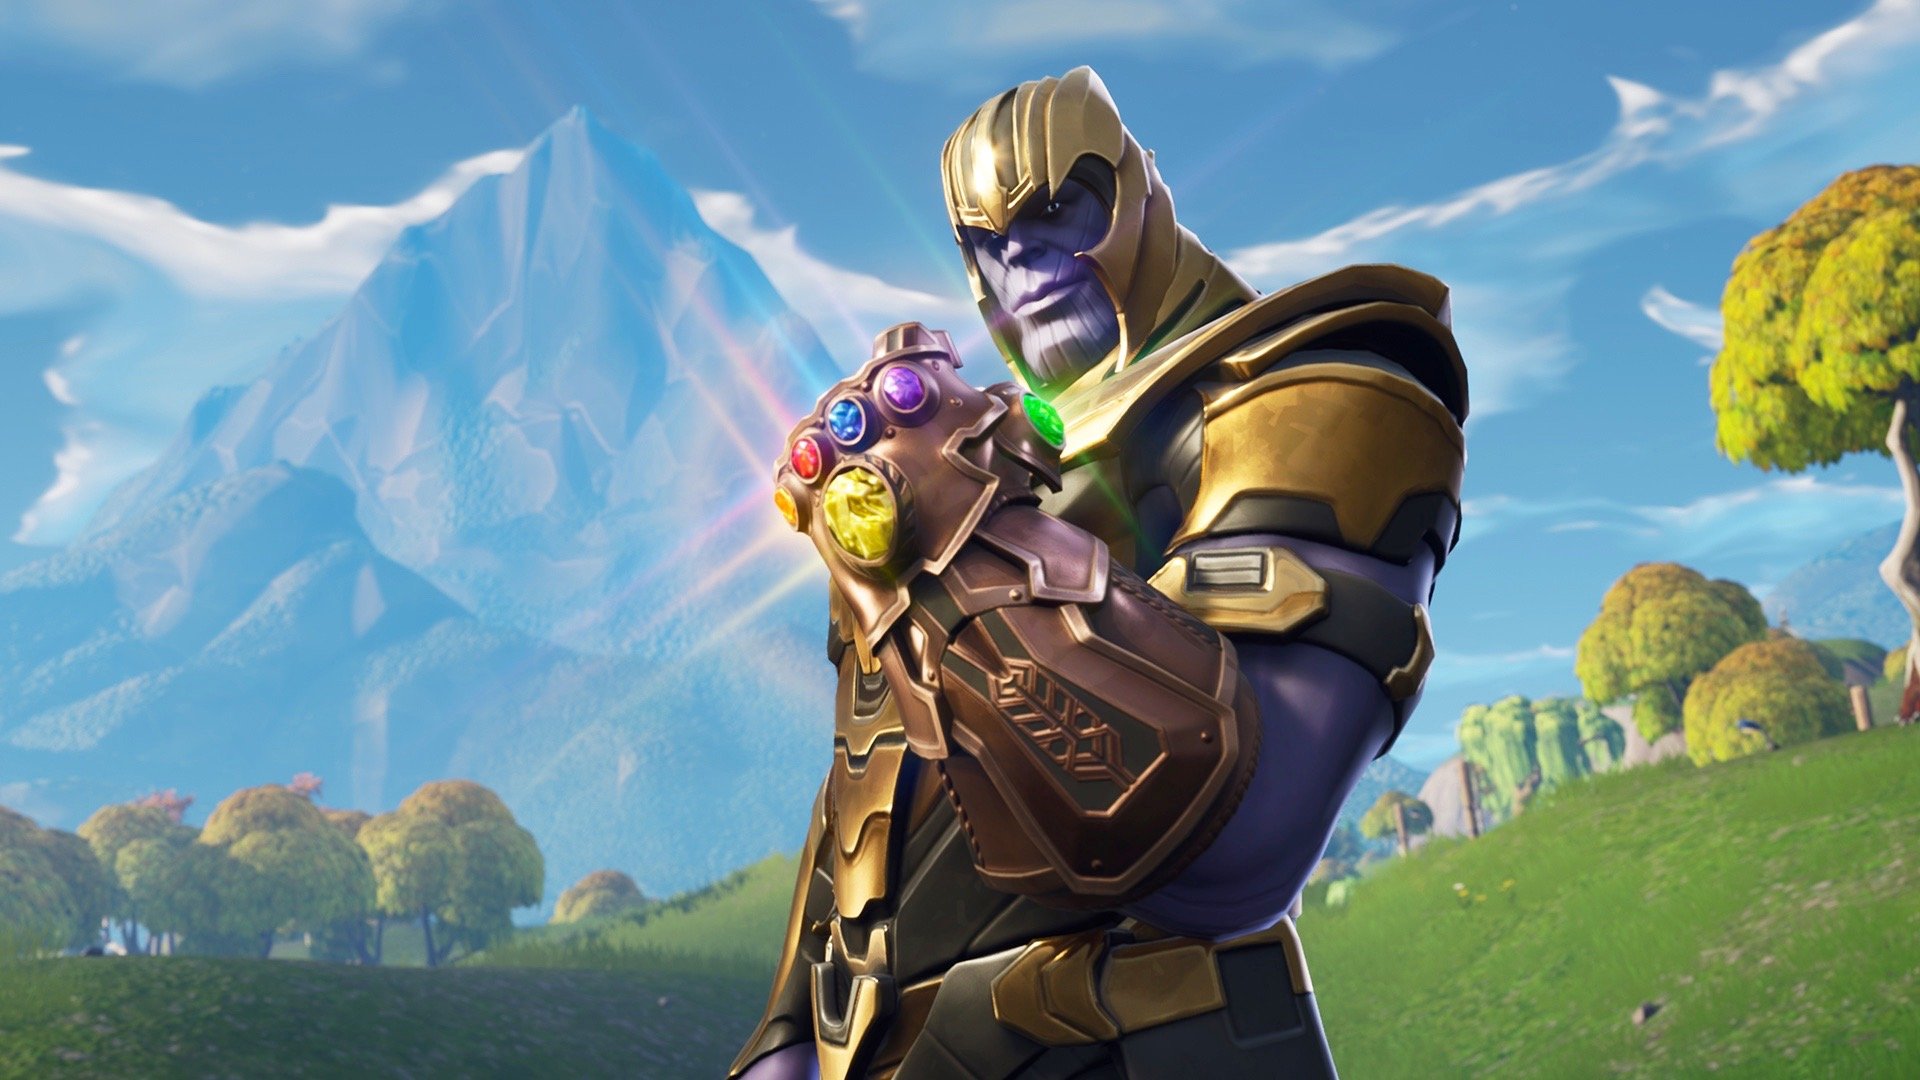 Fortnite 4 1 Disables Autorun On Ios And Adds The Avengers Mashup - fortnite 4 1 disables autorun on ios and ad!   ds the avengers mashup event with thanos for a limited time toucharcade!   